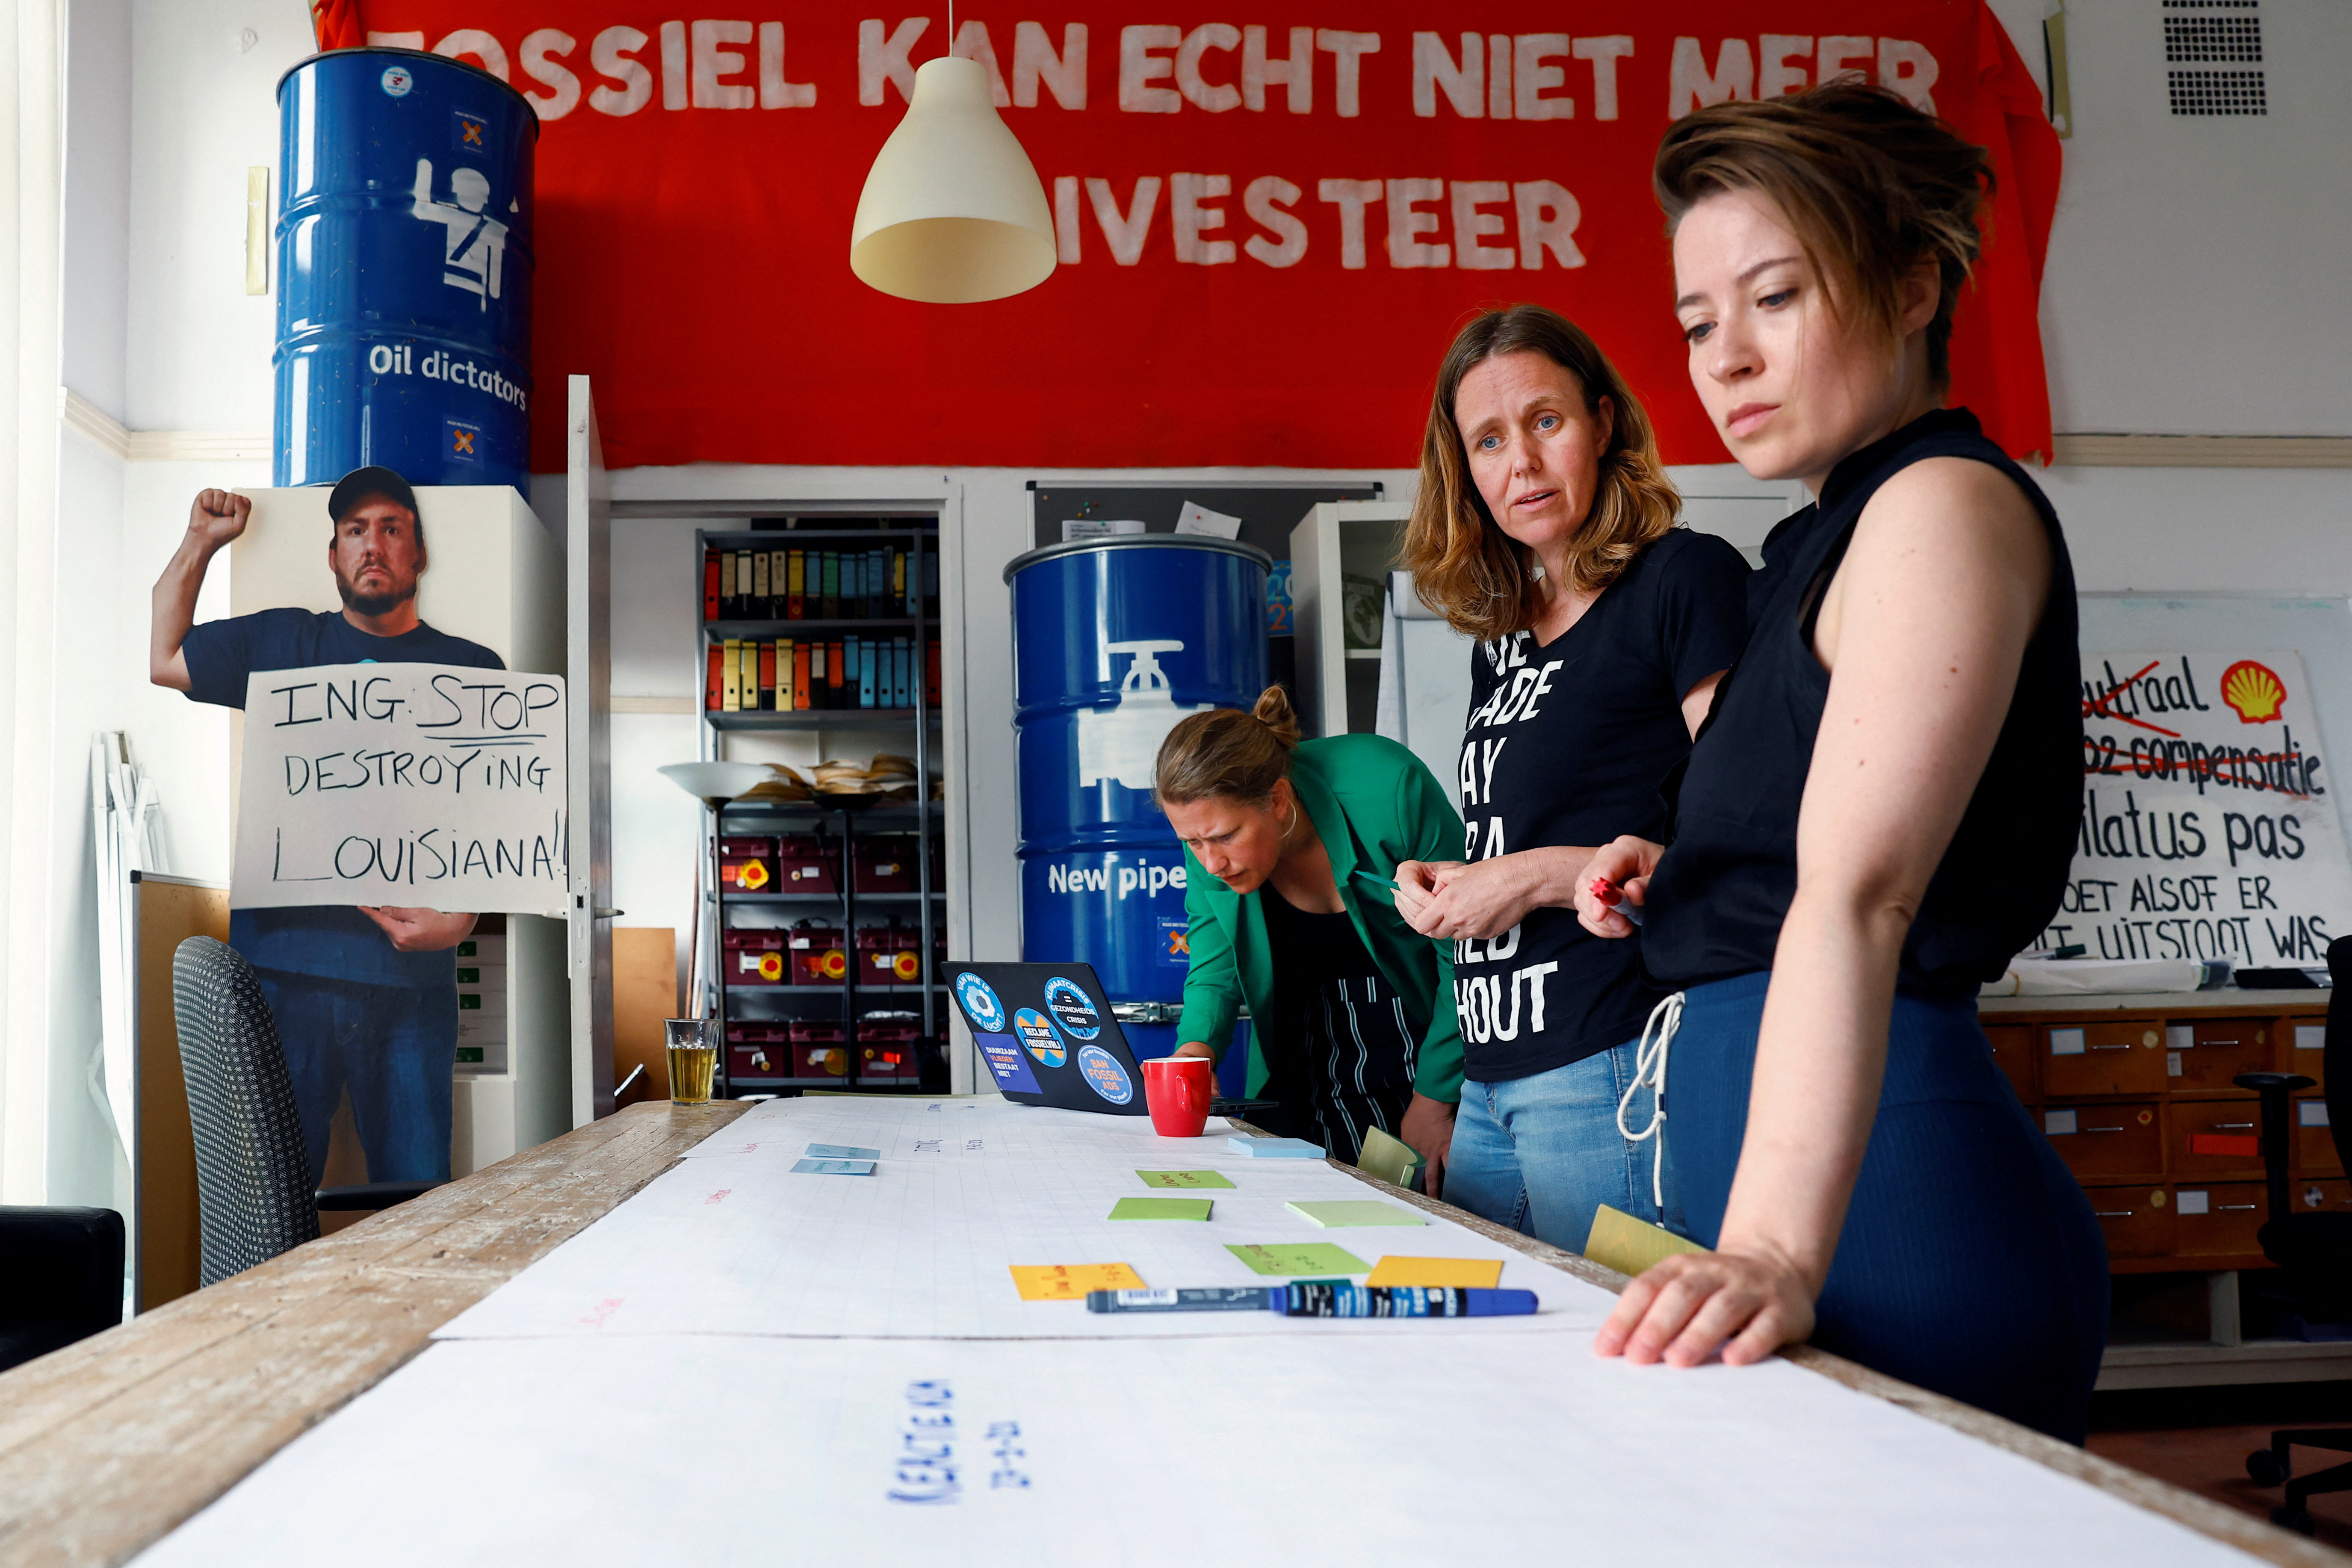 Campaign leader Hiske Arts speaks during a meeting of climate group Fossielvrij Nederland (Fossil Free Netherlands) in Amsterdam